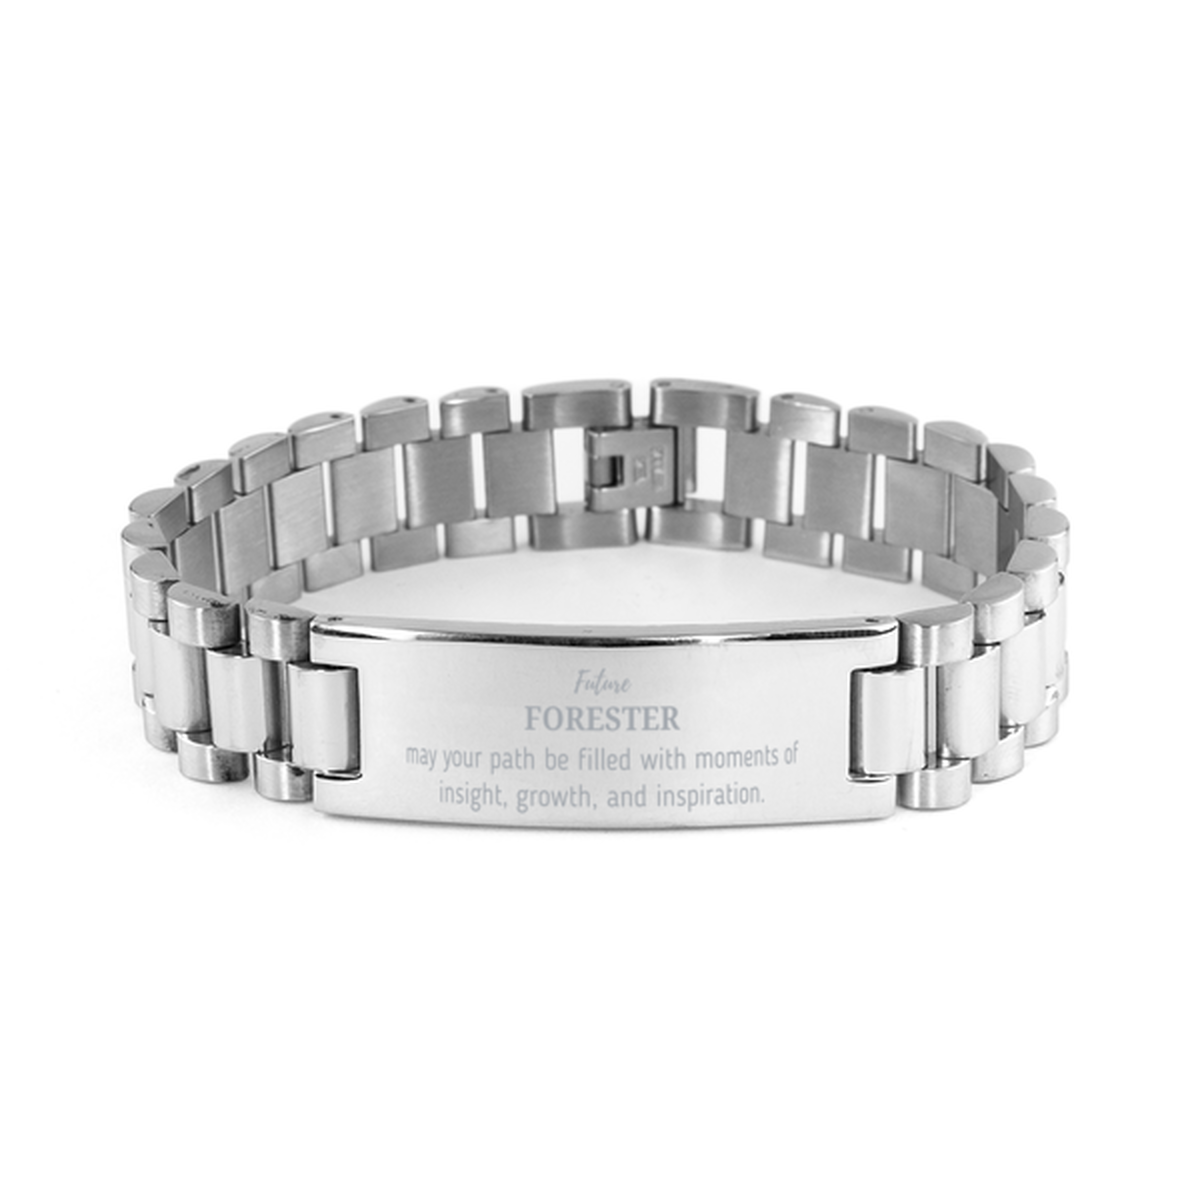 Future Forester Gifts, May your path be filled with moments of insight, Graduation Gifts for New Forester, Christmas Unique Ladder Stainless Steel Bracelet For Men, Women, Friends